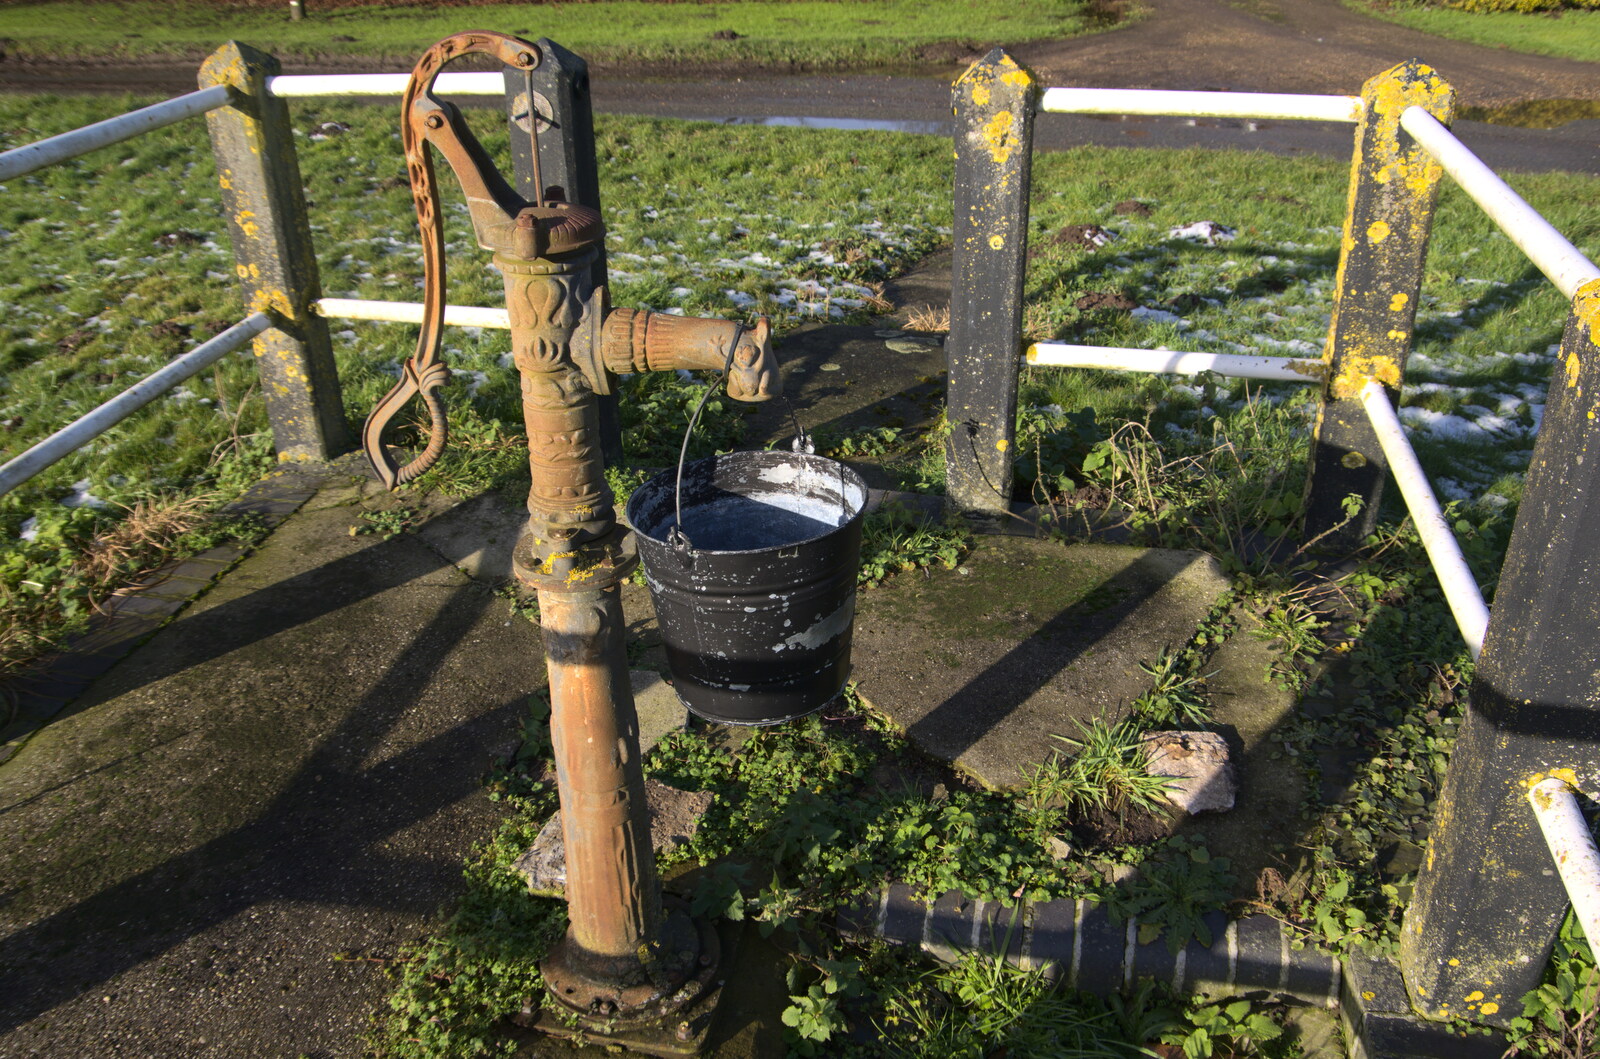 The village pump from Winter Lockdown Walks, Thrandeston and Brome, Suffolk - 24th January 2021